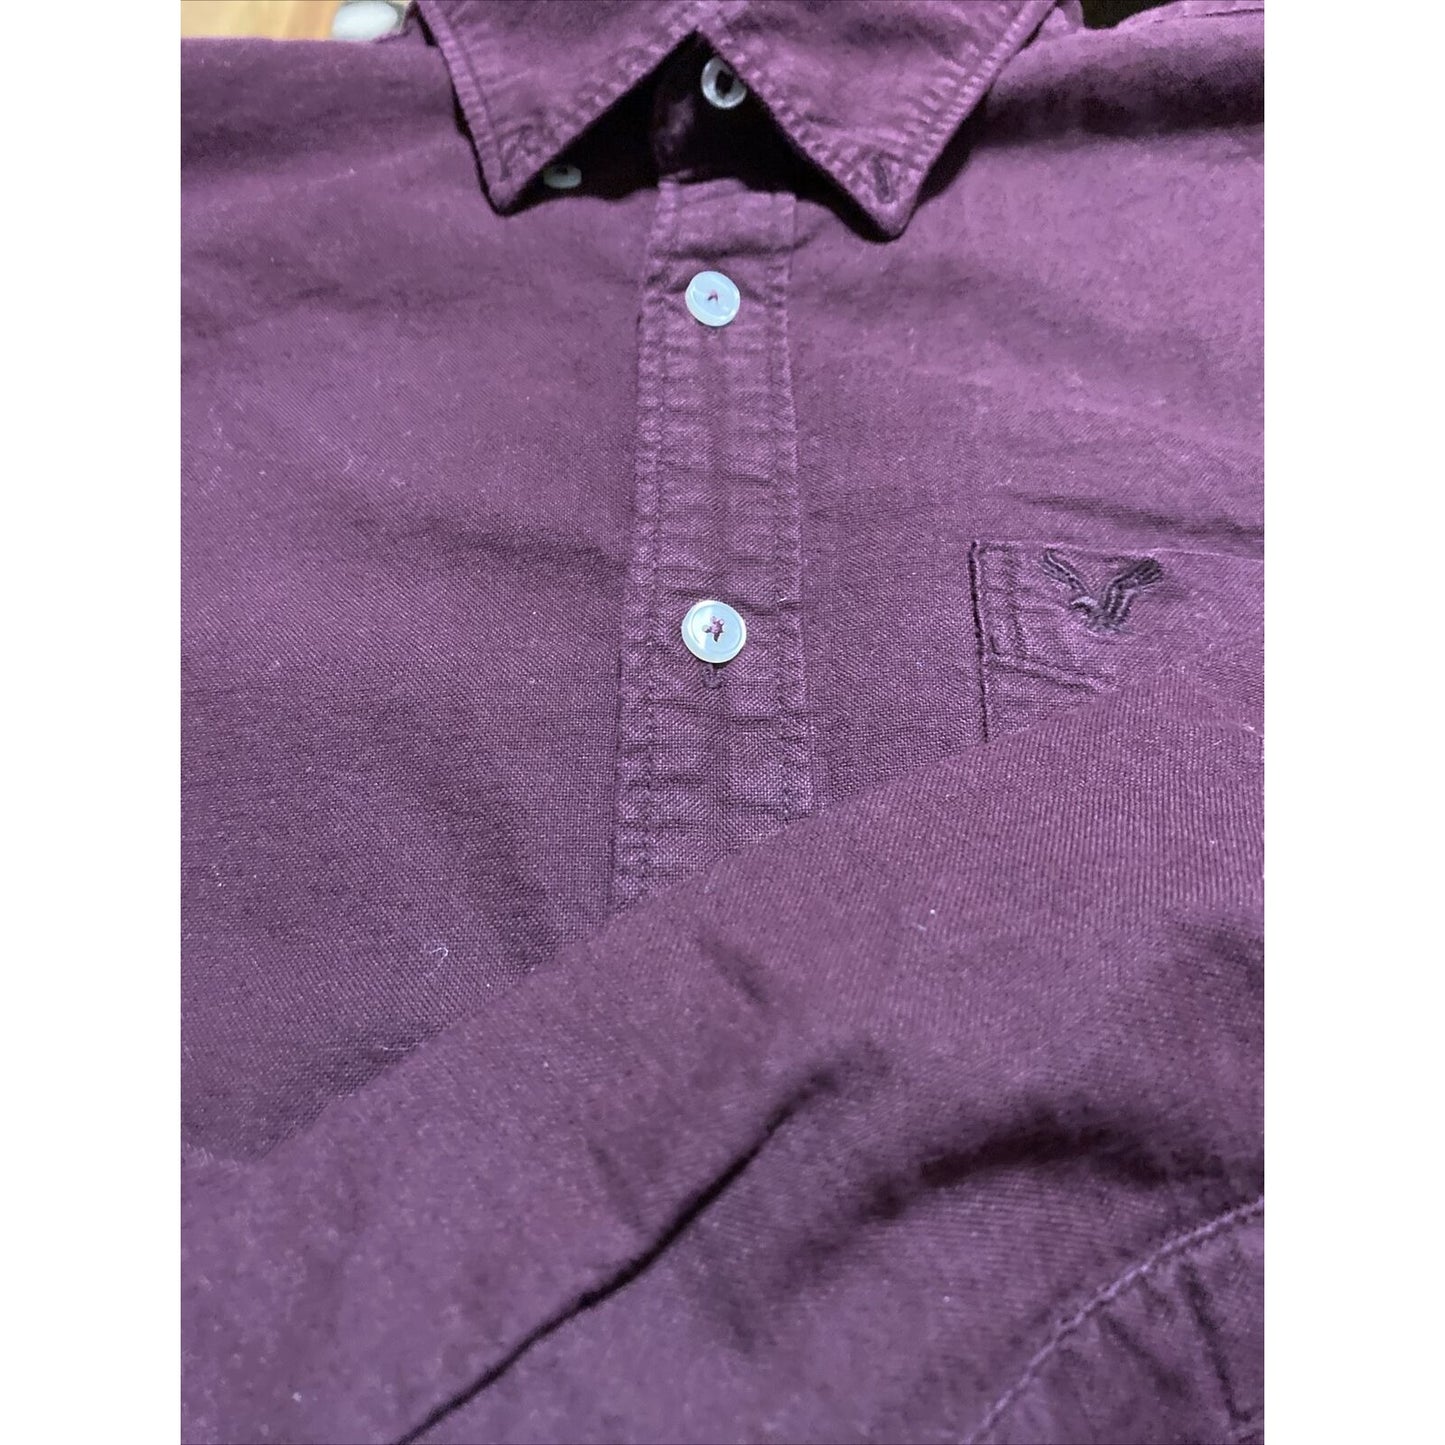 American Eagle Outfitters Men’s Medium Plum Button-down Classic Fit Long Sleeves